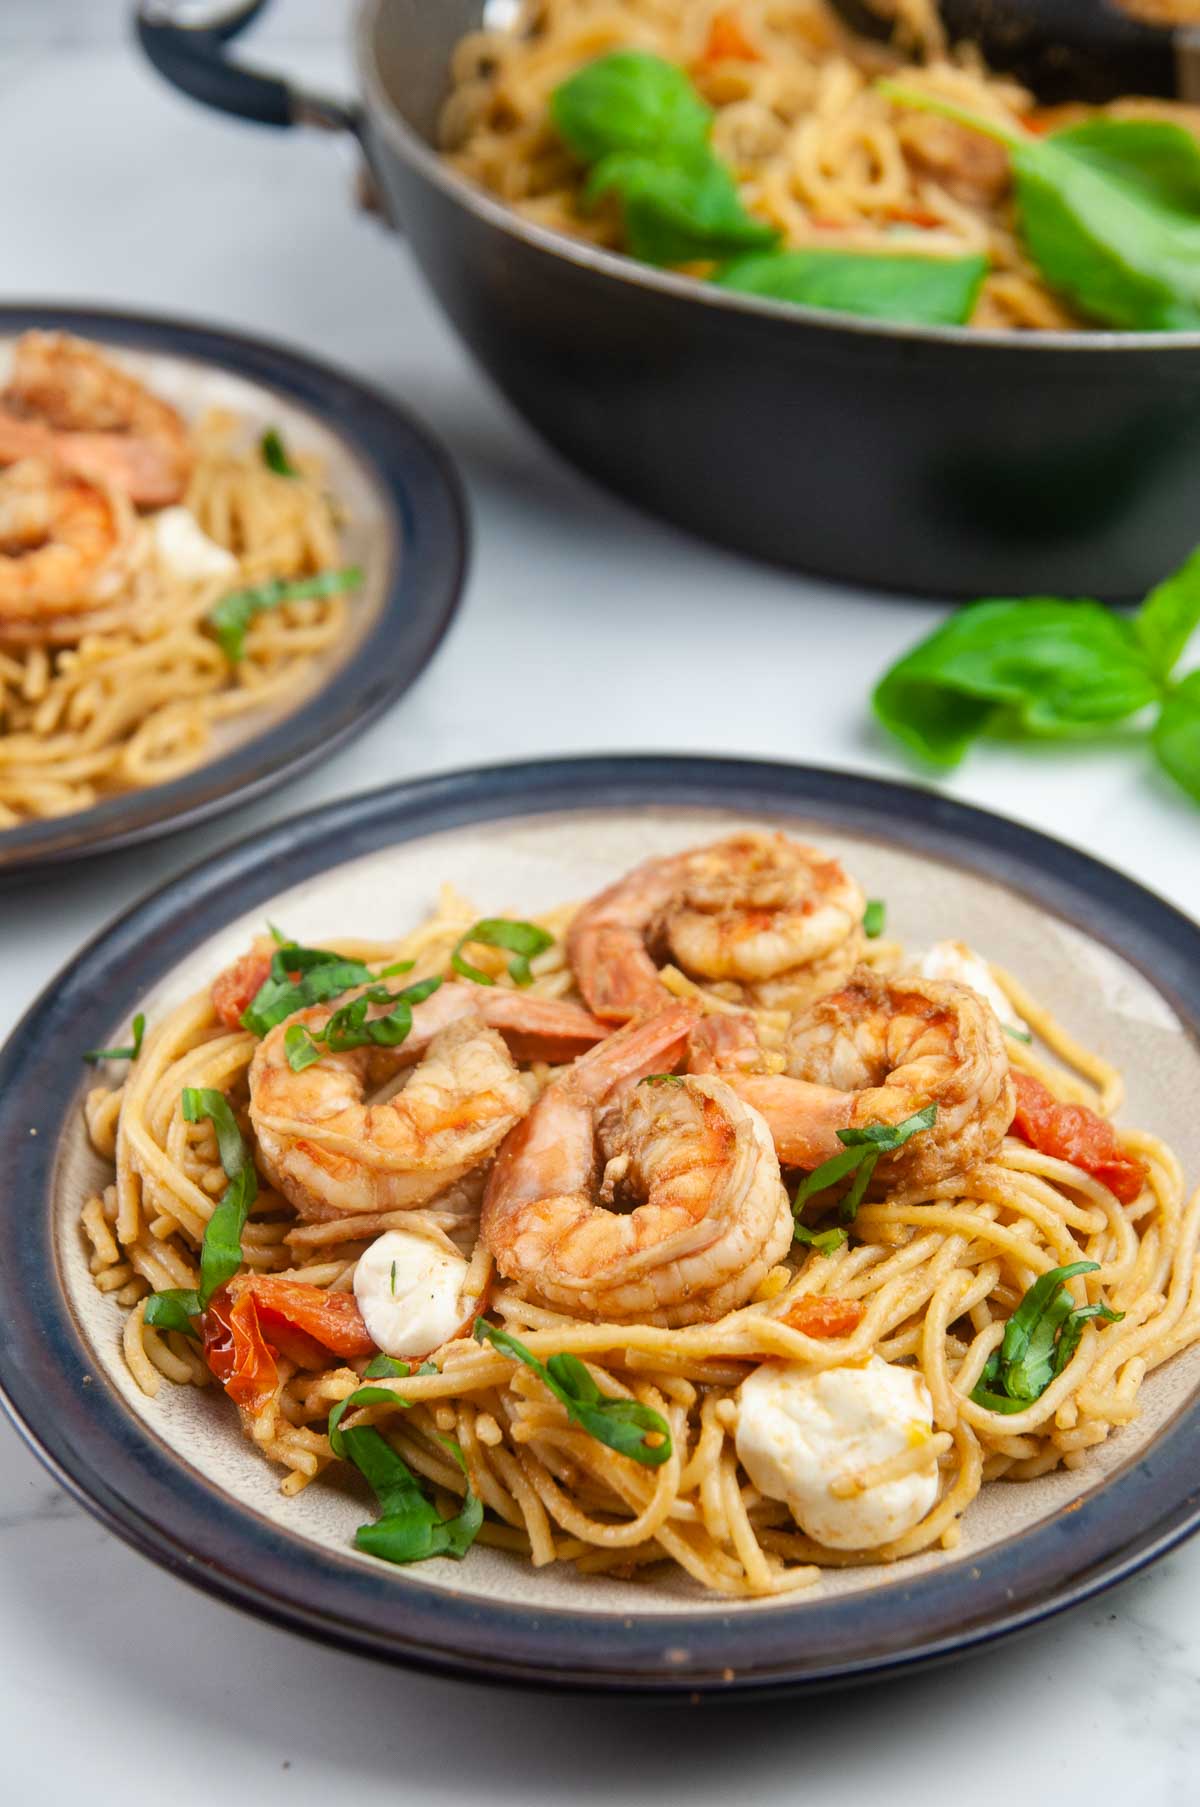 Shrimp Caprese pasta is an easy seafood pasta dish featuring shrimp, tomatoes, and mozzarella in a balsamic wine glaze. Perfect for entertaining or date night in but easy enough for any day.